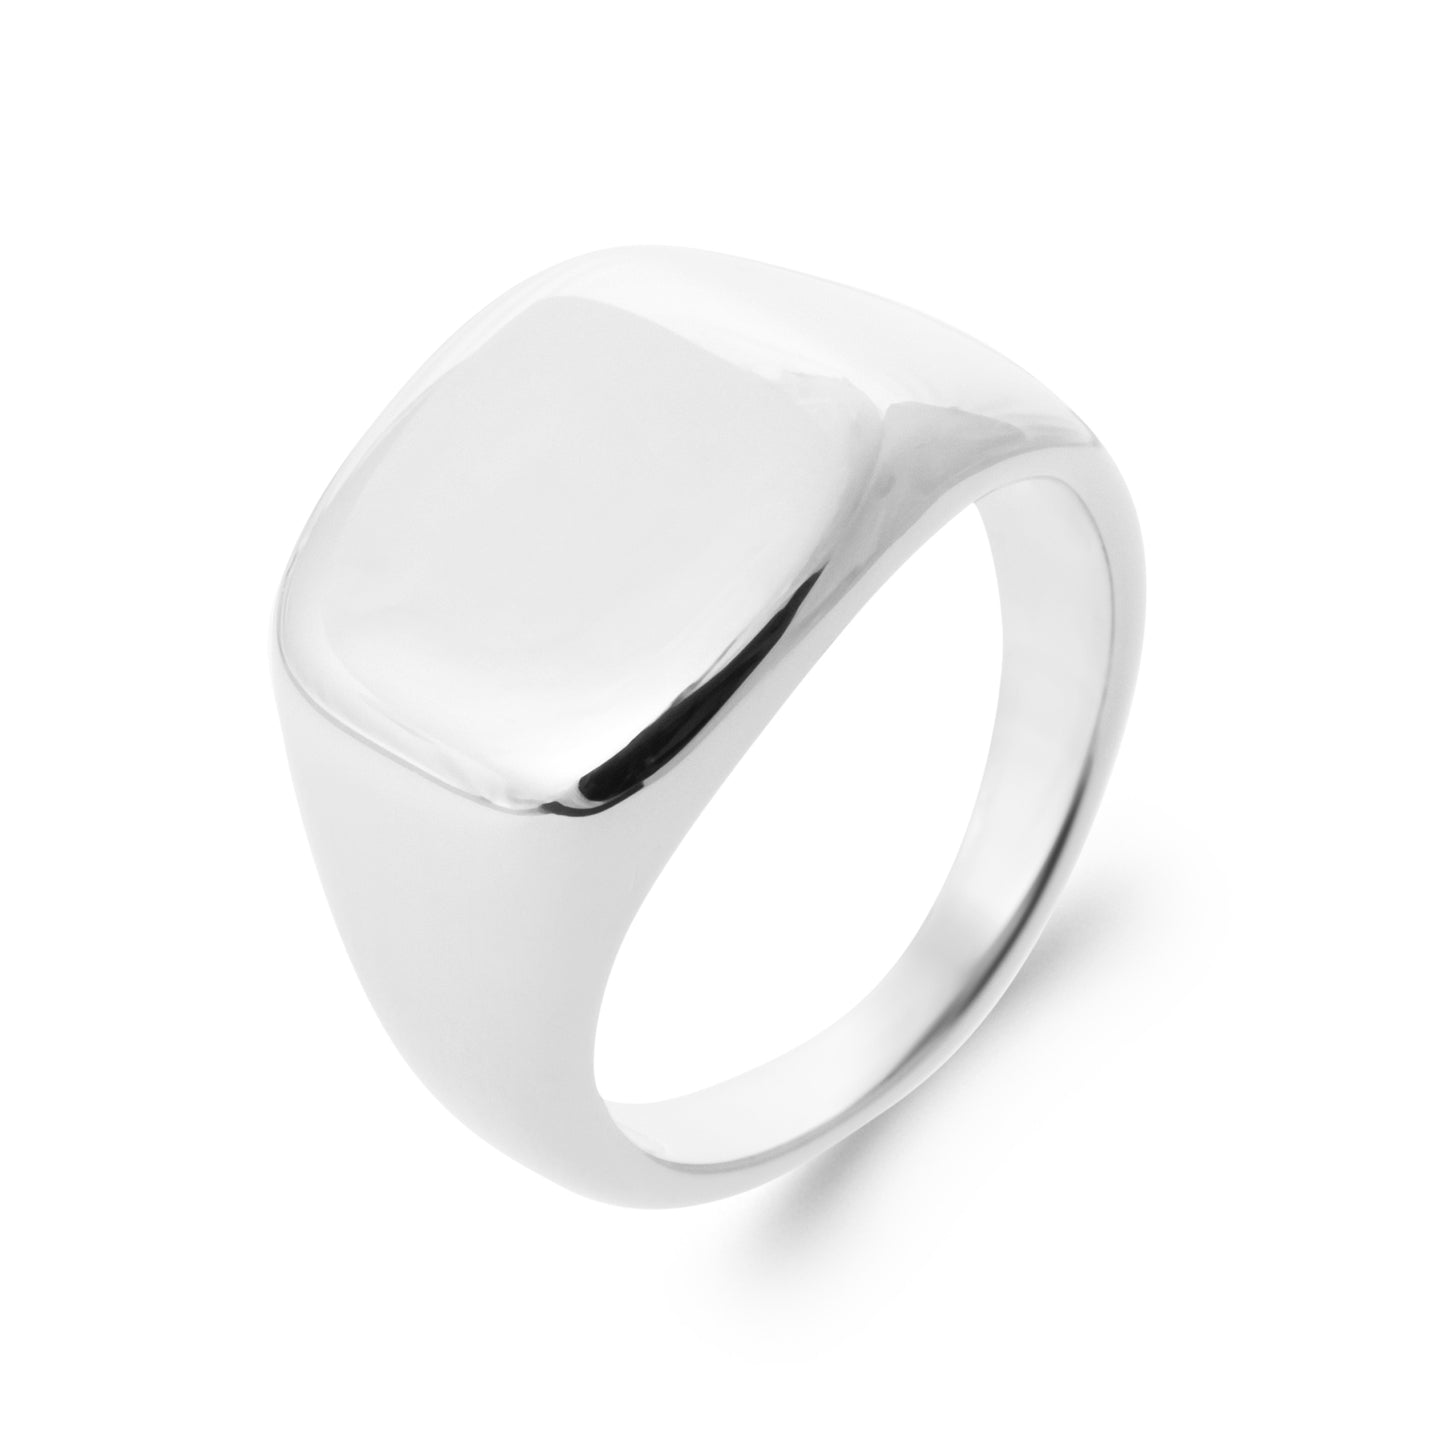 Line - Intertwined Silver Ring